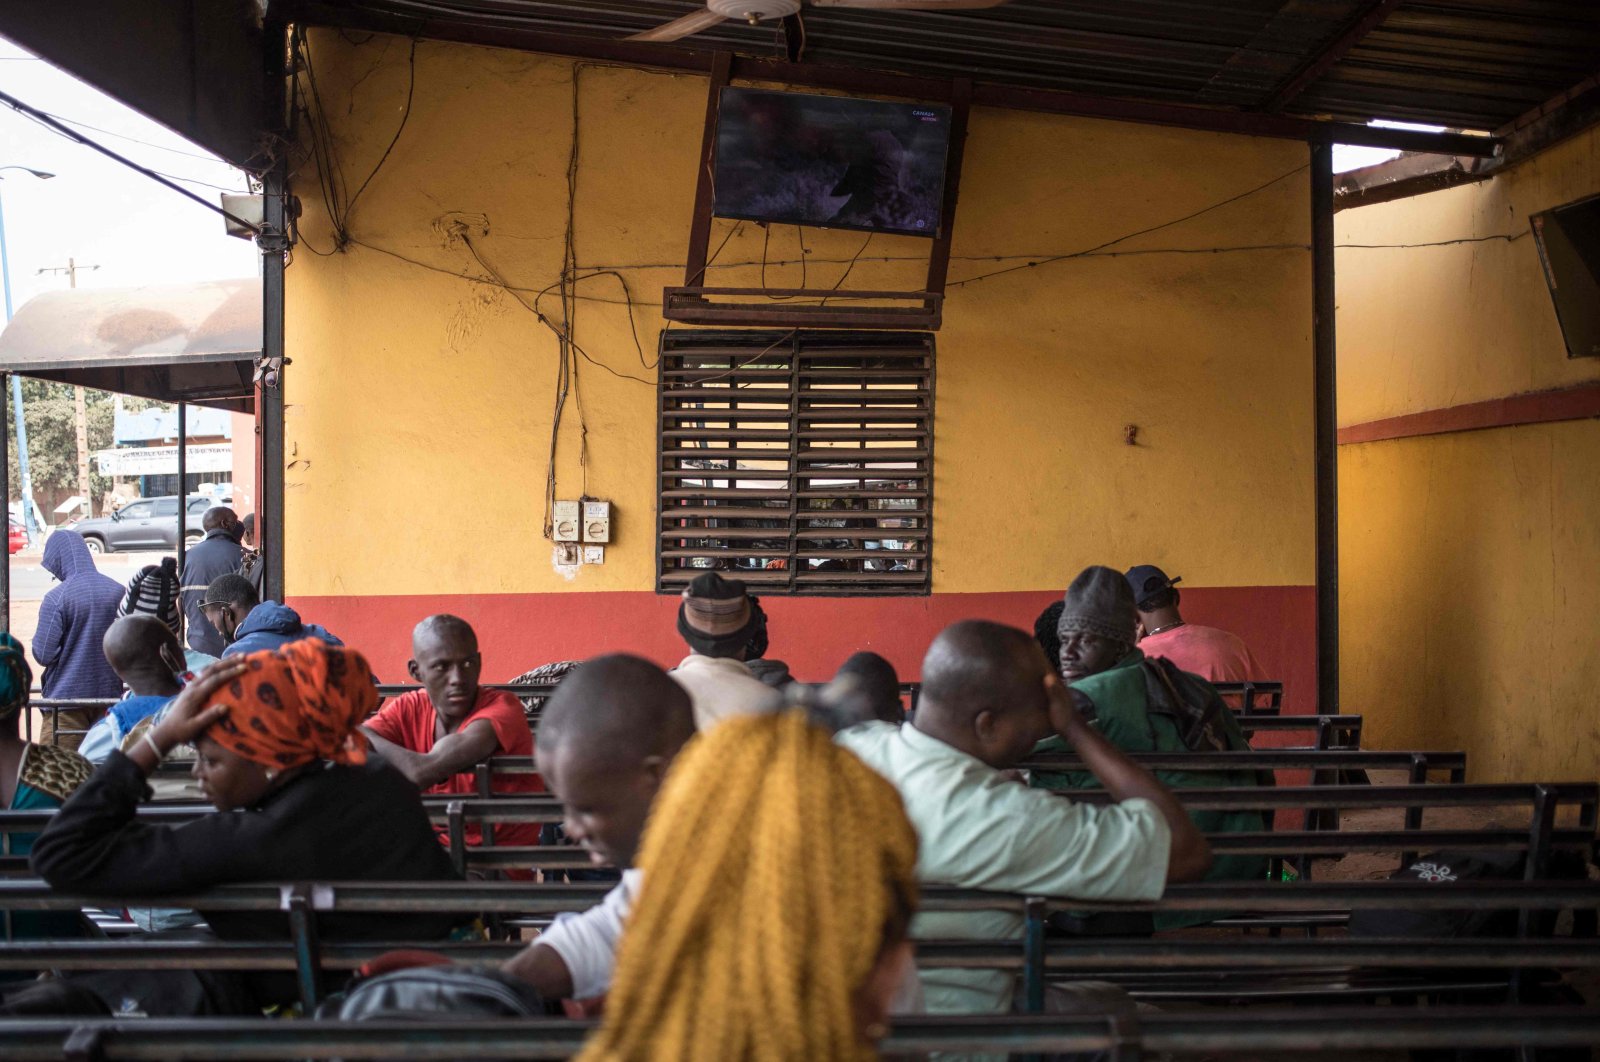 Travelers watch television while waiting for cross border transport to resume in Bamako, Mali on Jan. 11, 2022. (AFP Photo)